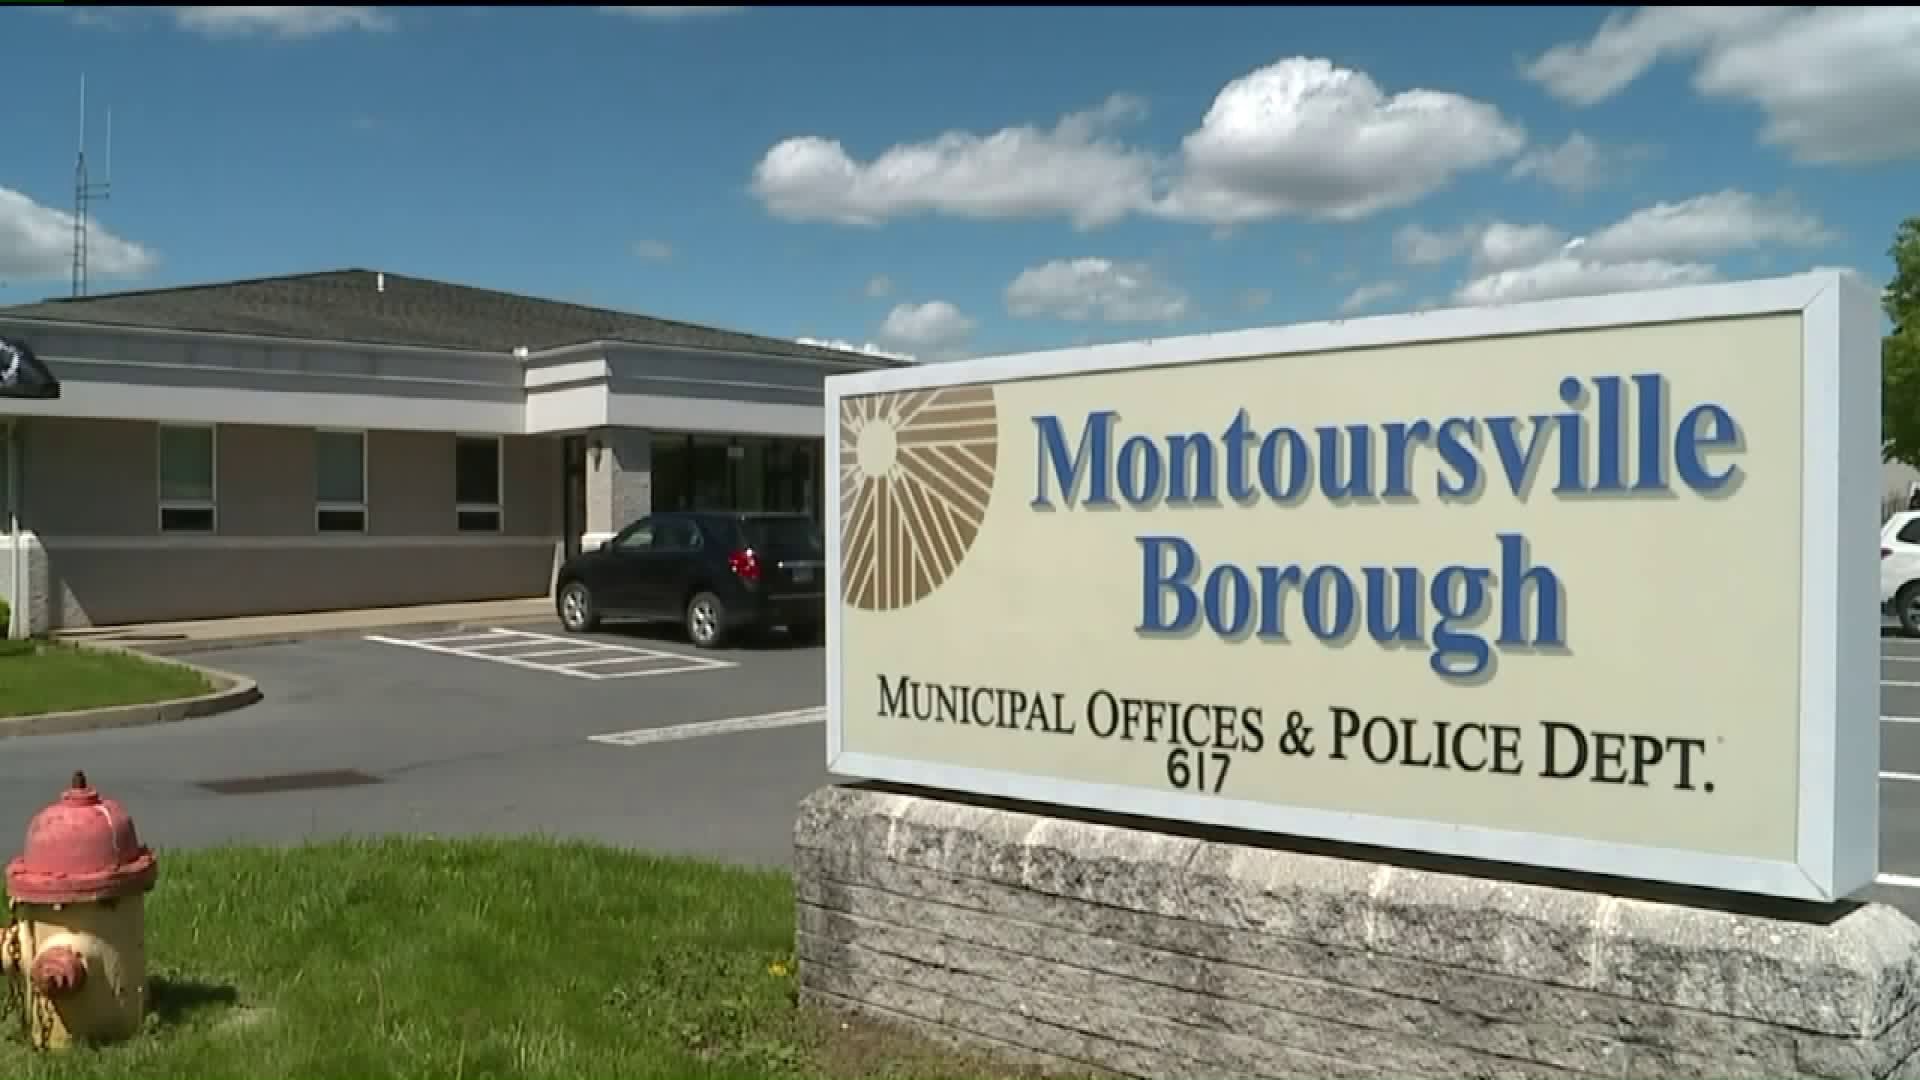 No Candidates on Ballot for Key Posts in Montoursville